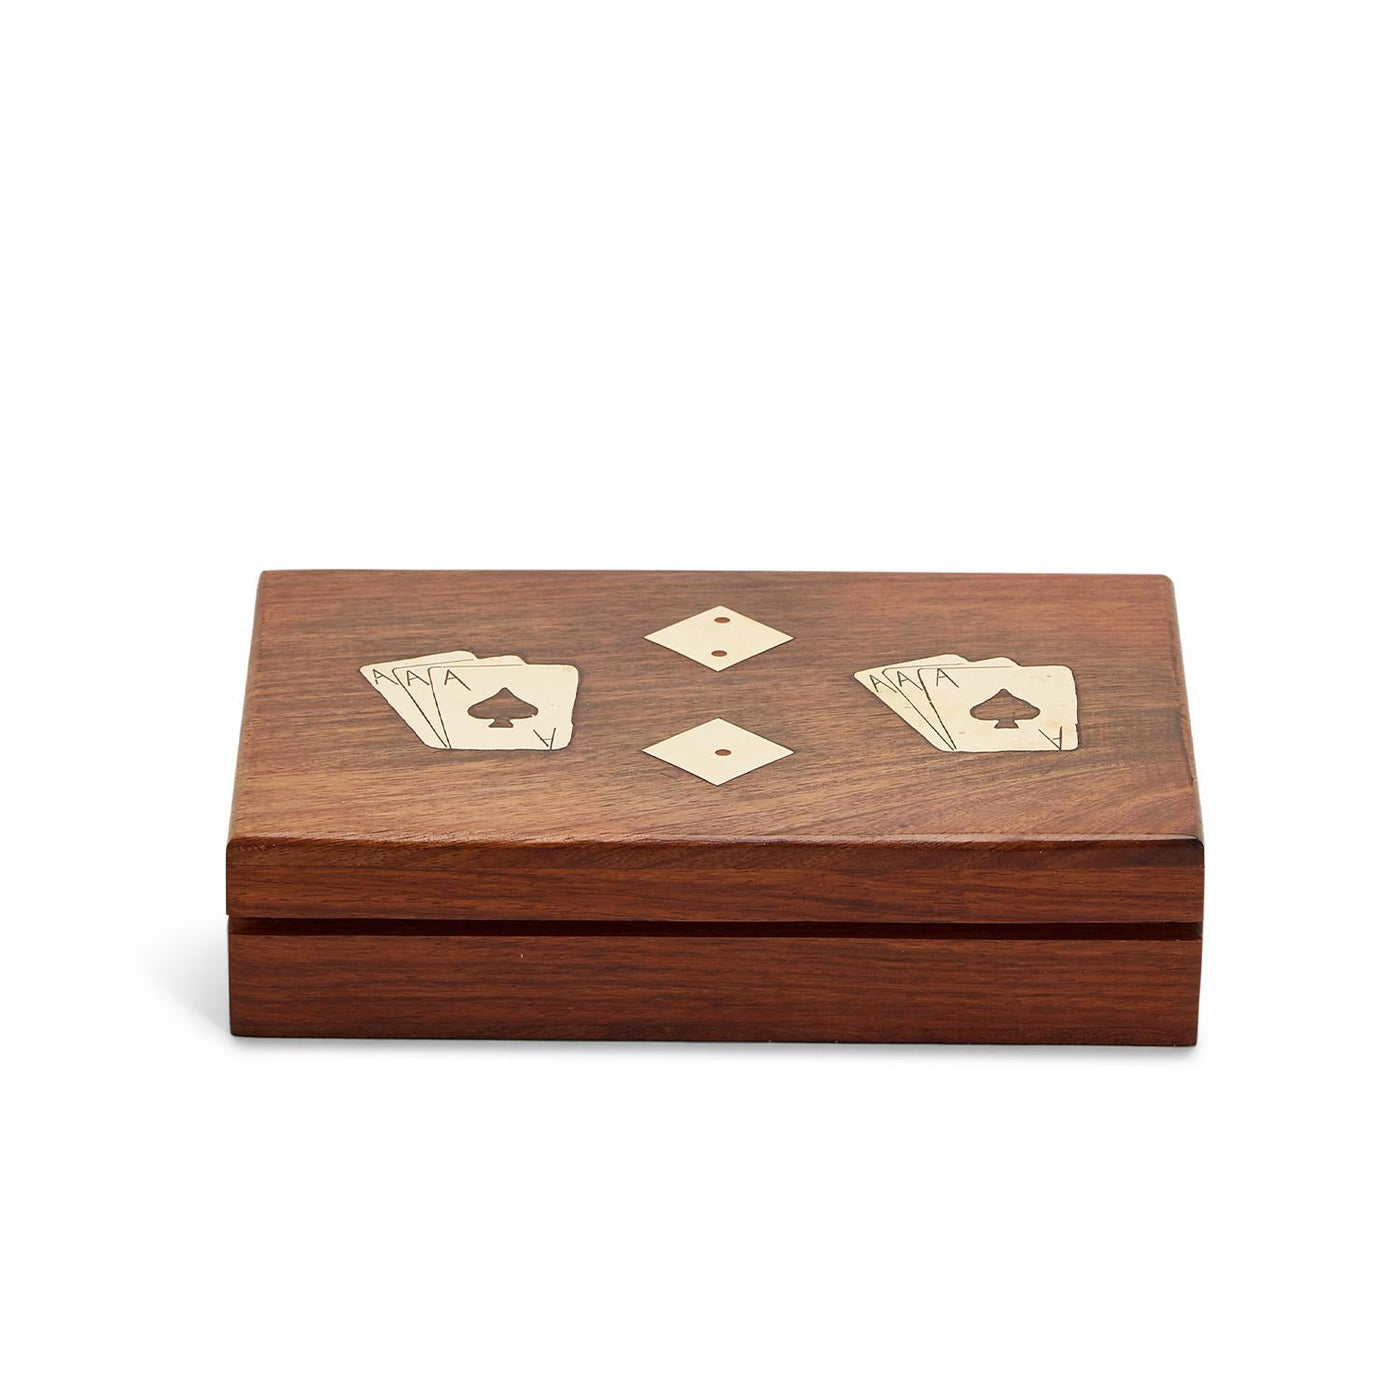 PLAYING CARDS & DICE SET IN WOOD CRAFTED BOX